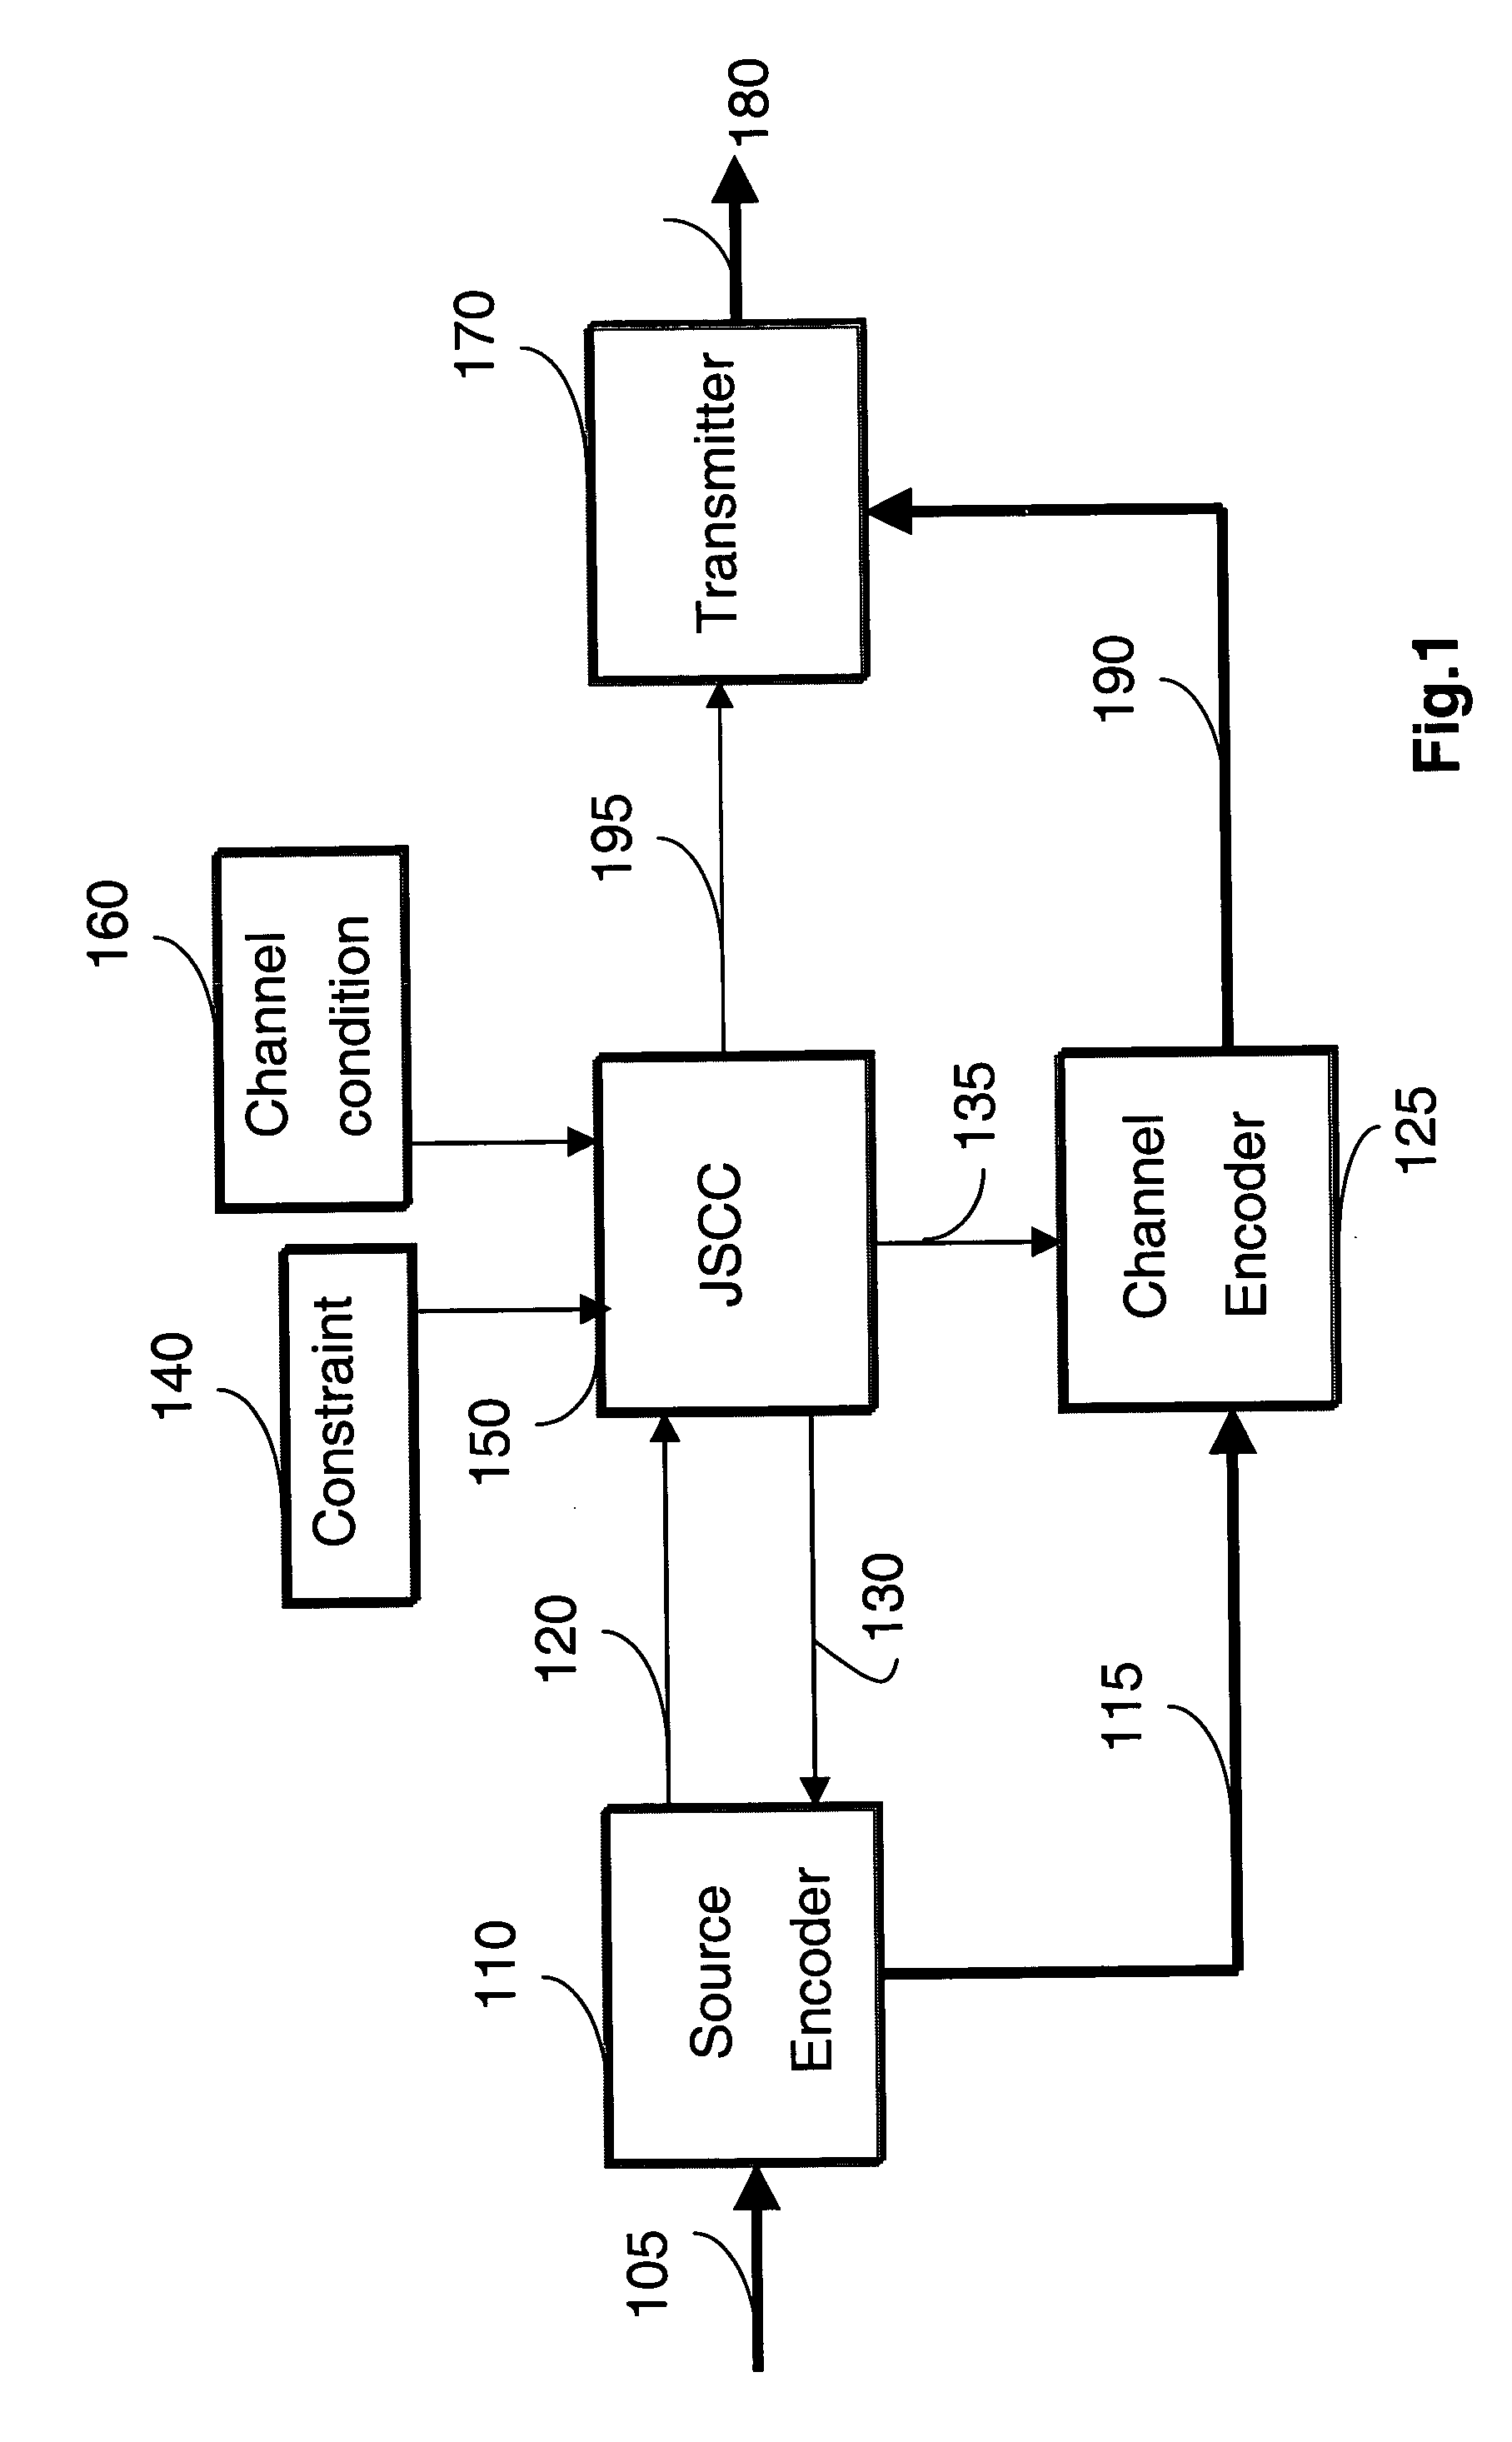 Method and system for content aware and energy efficient transmission of videos and images